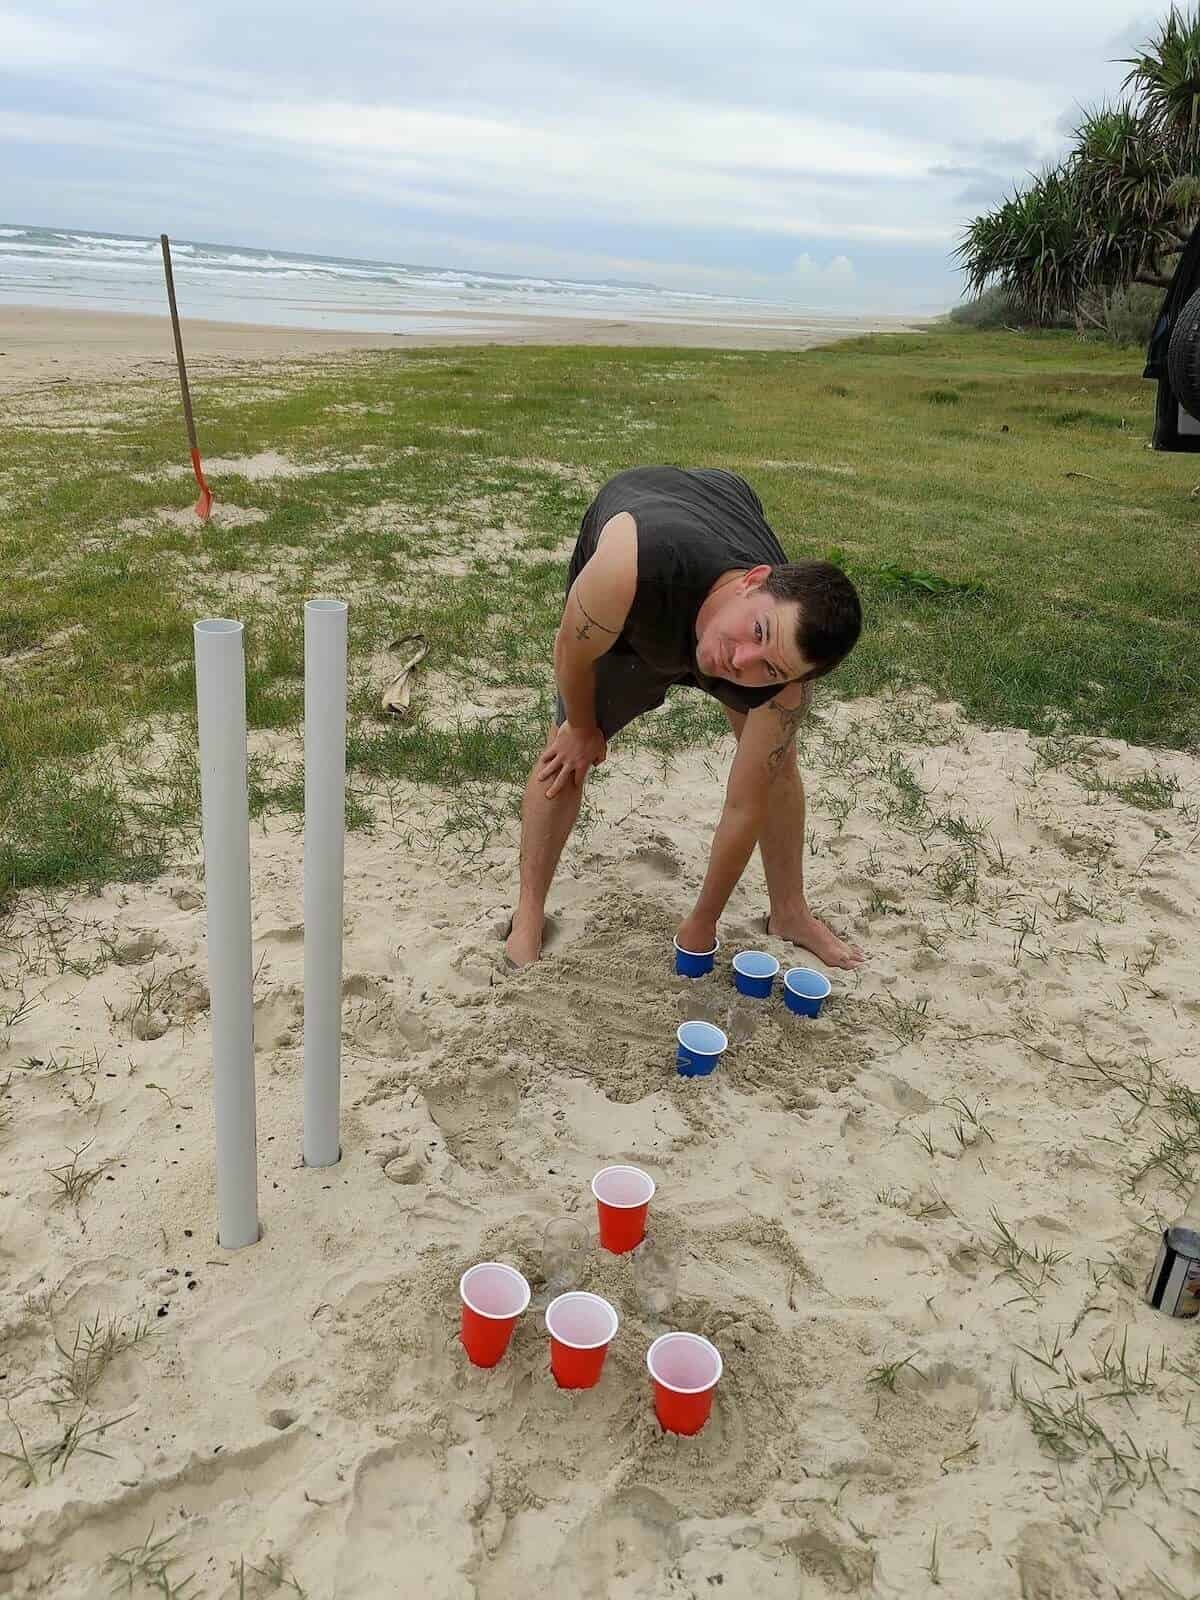 improvising with beer pong while camping